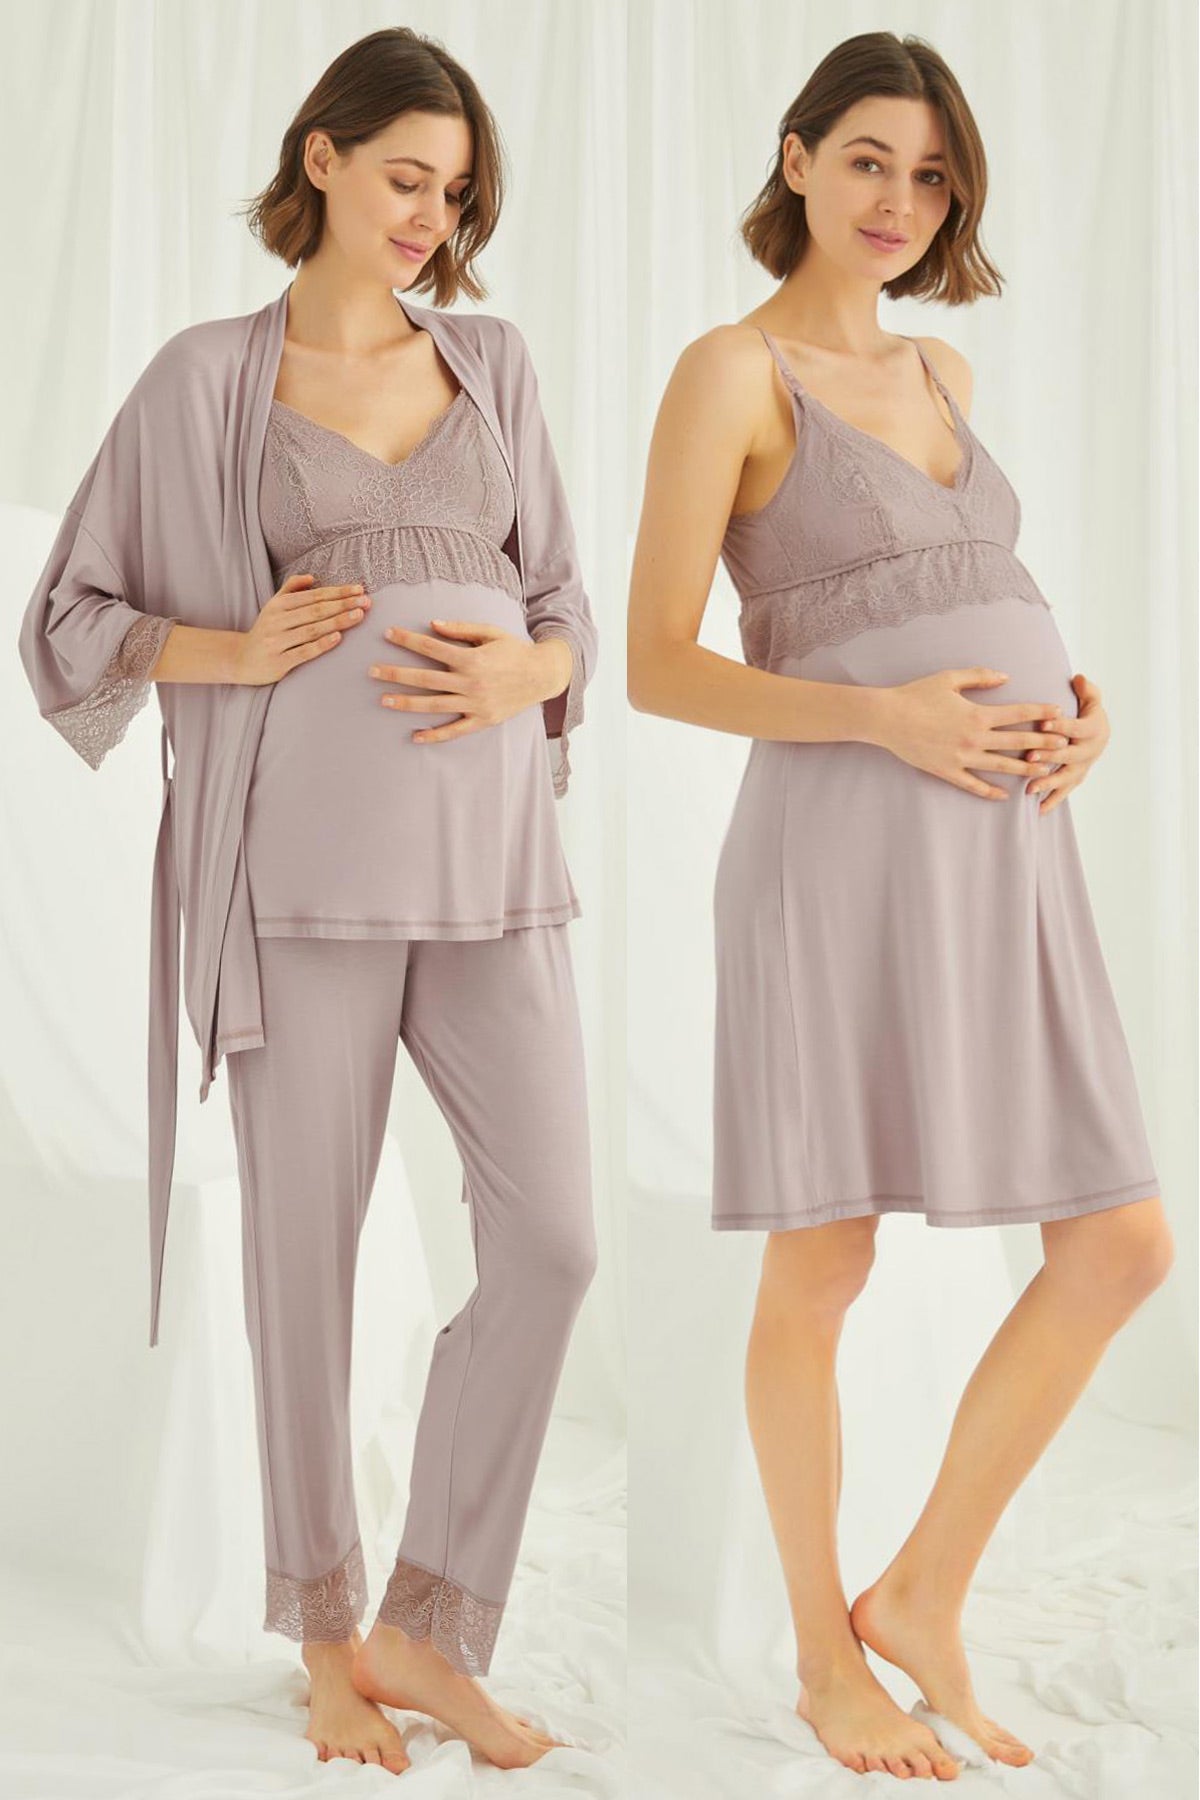 Shopymommy 431490 Lace Strappy 4 Pieces Maternity & Nursing Set Coffee